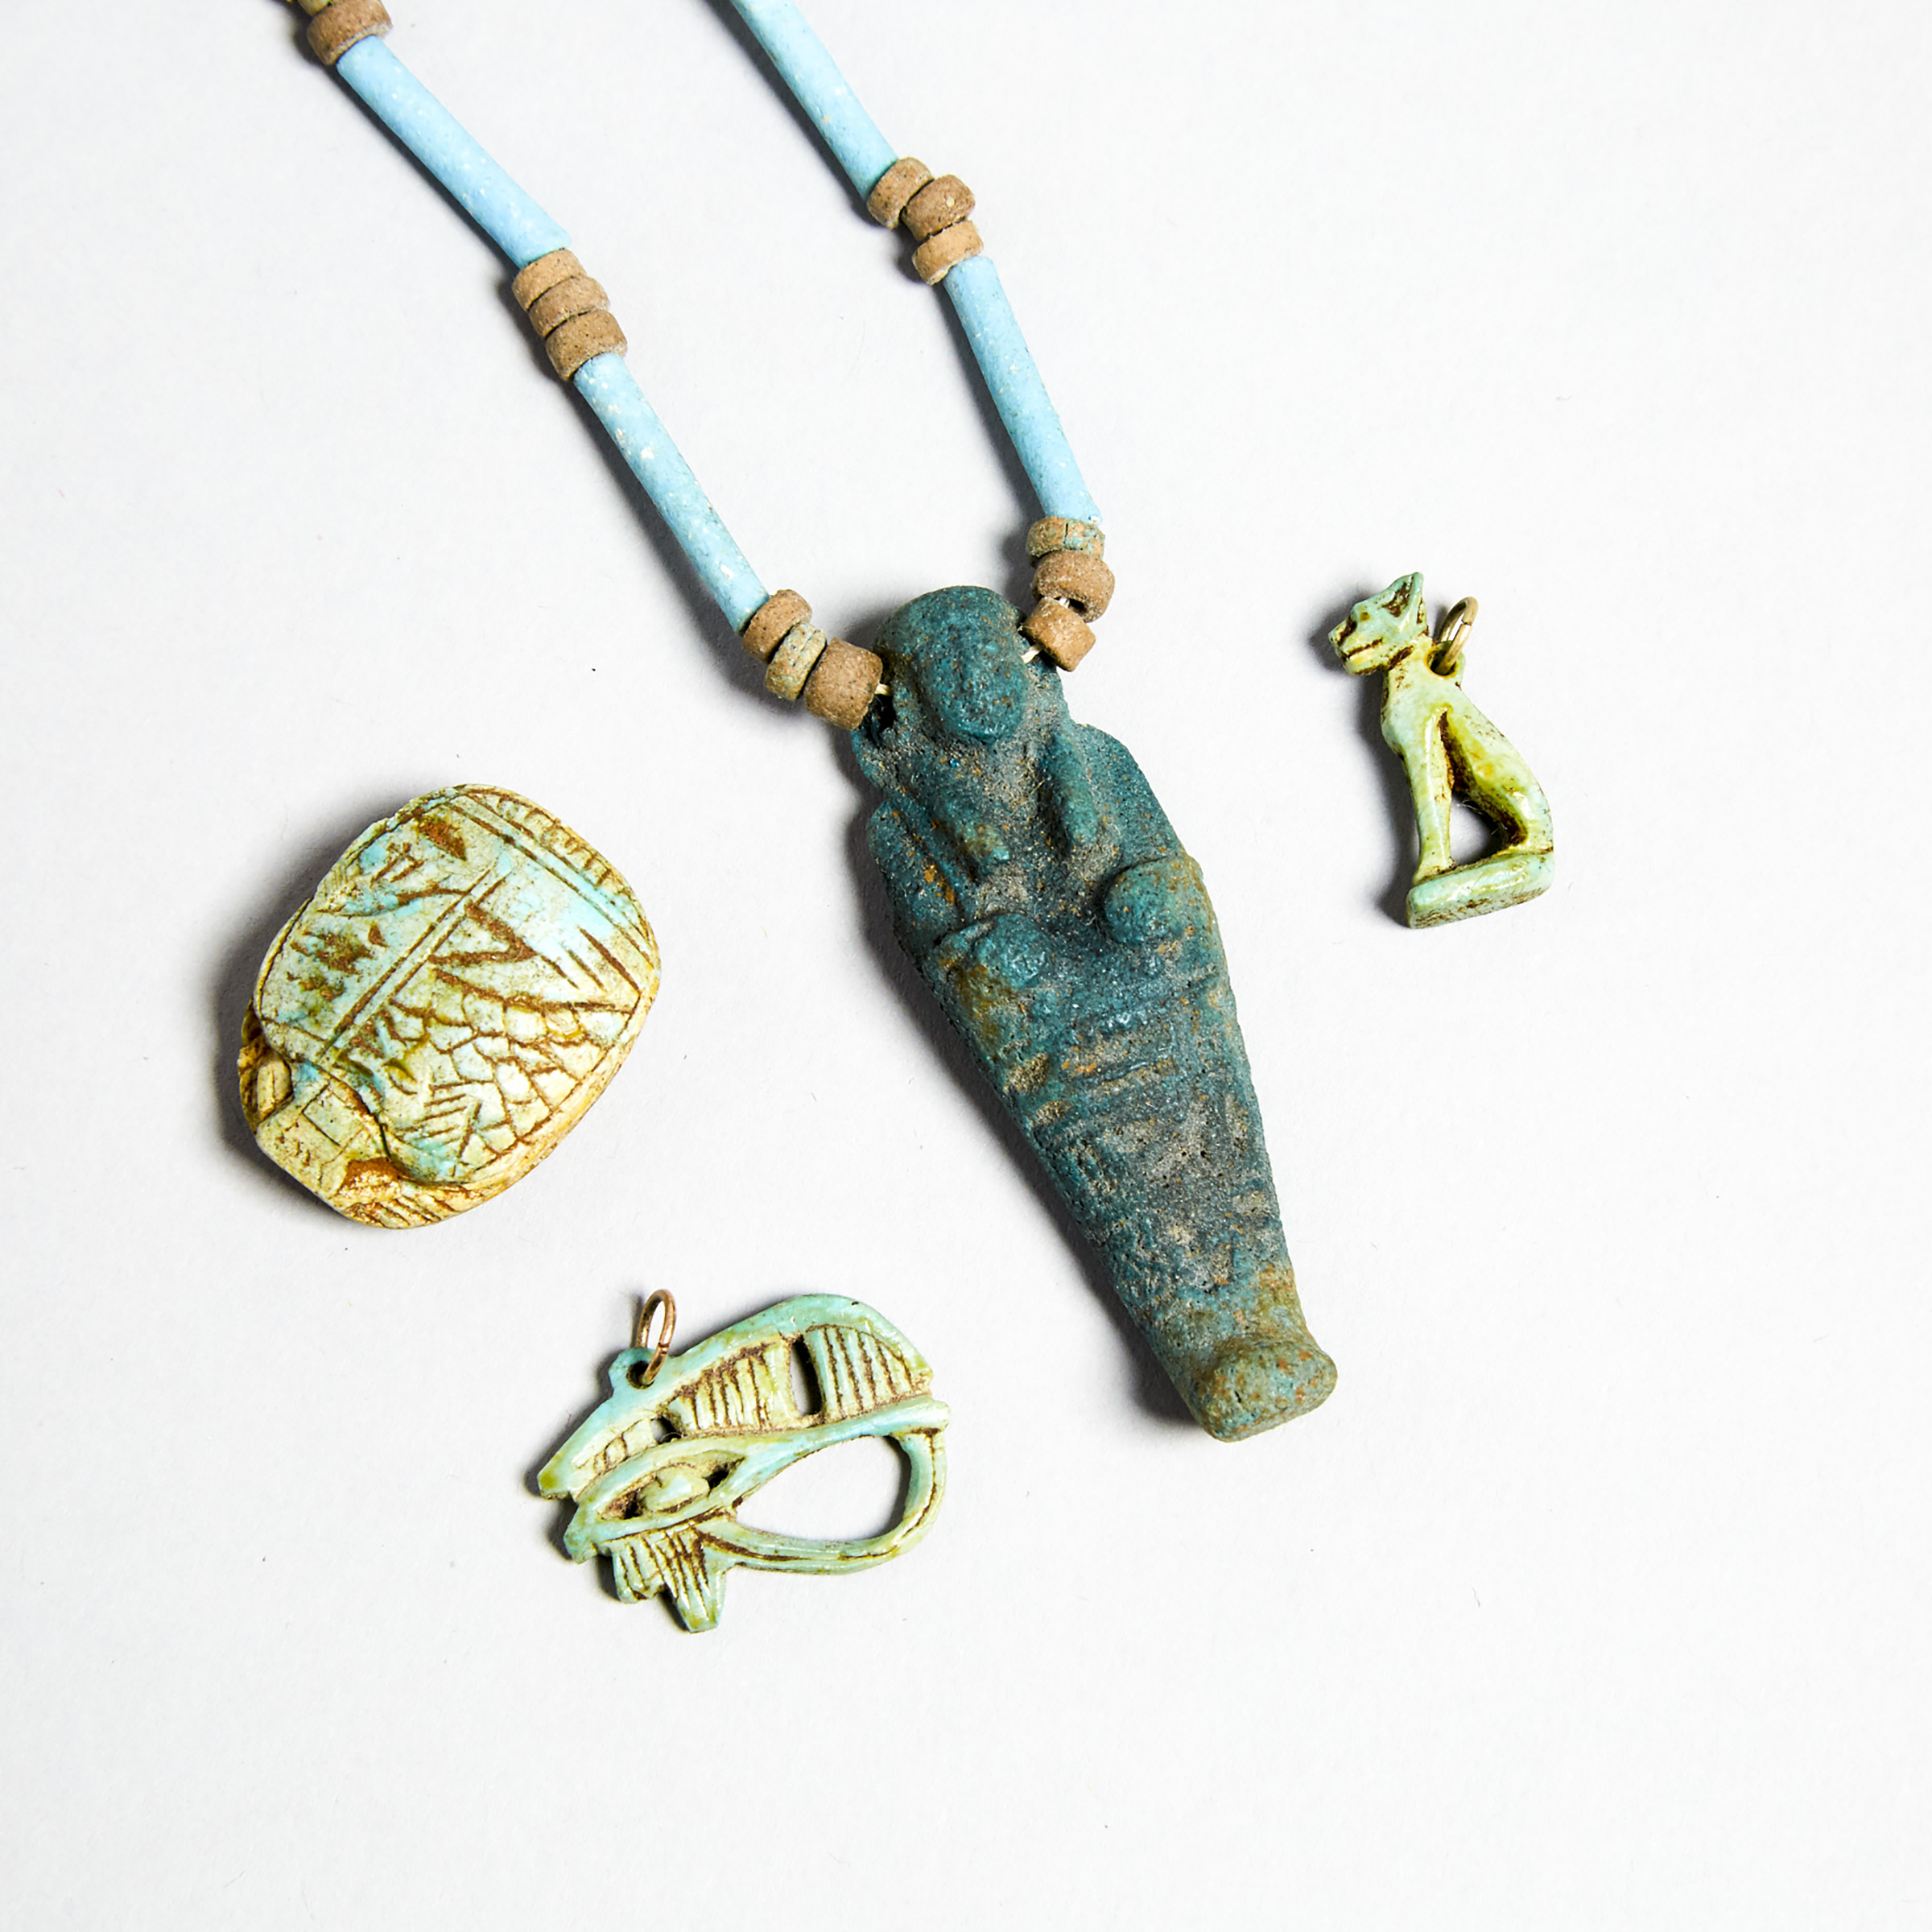 Group of Egyptian Turquoise Faience Amulets and Beads, New Kingdom to Late Period, 1550-332 B.C.